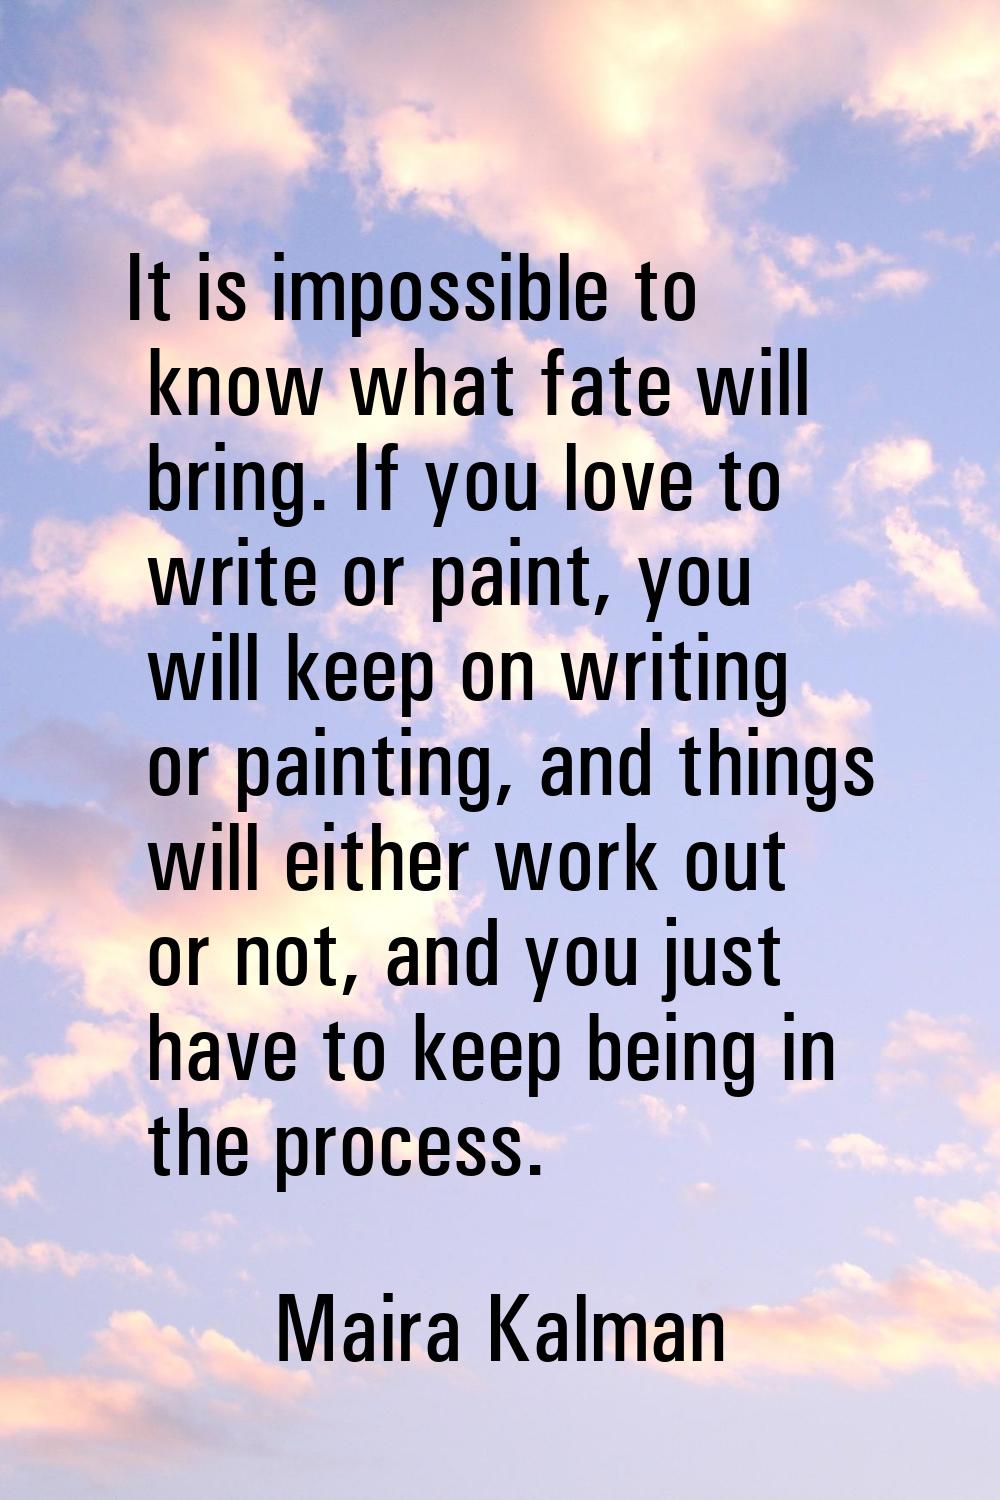 It is impossible to know what fate will bring. If you love to write or paint, you will keep on writ